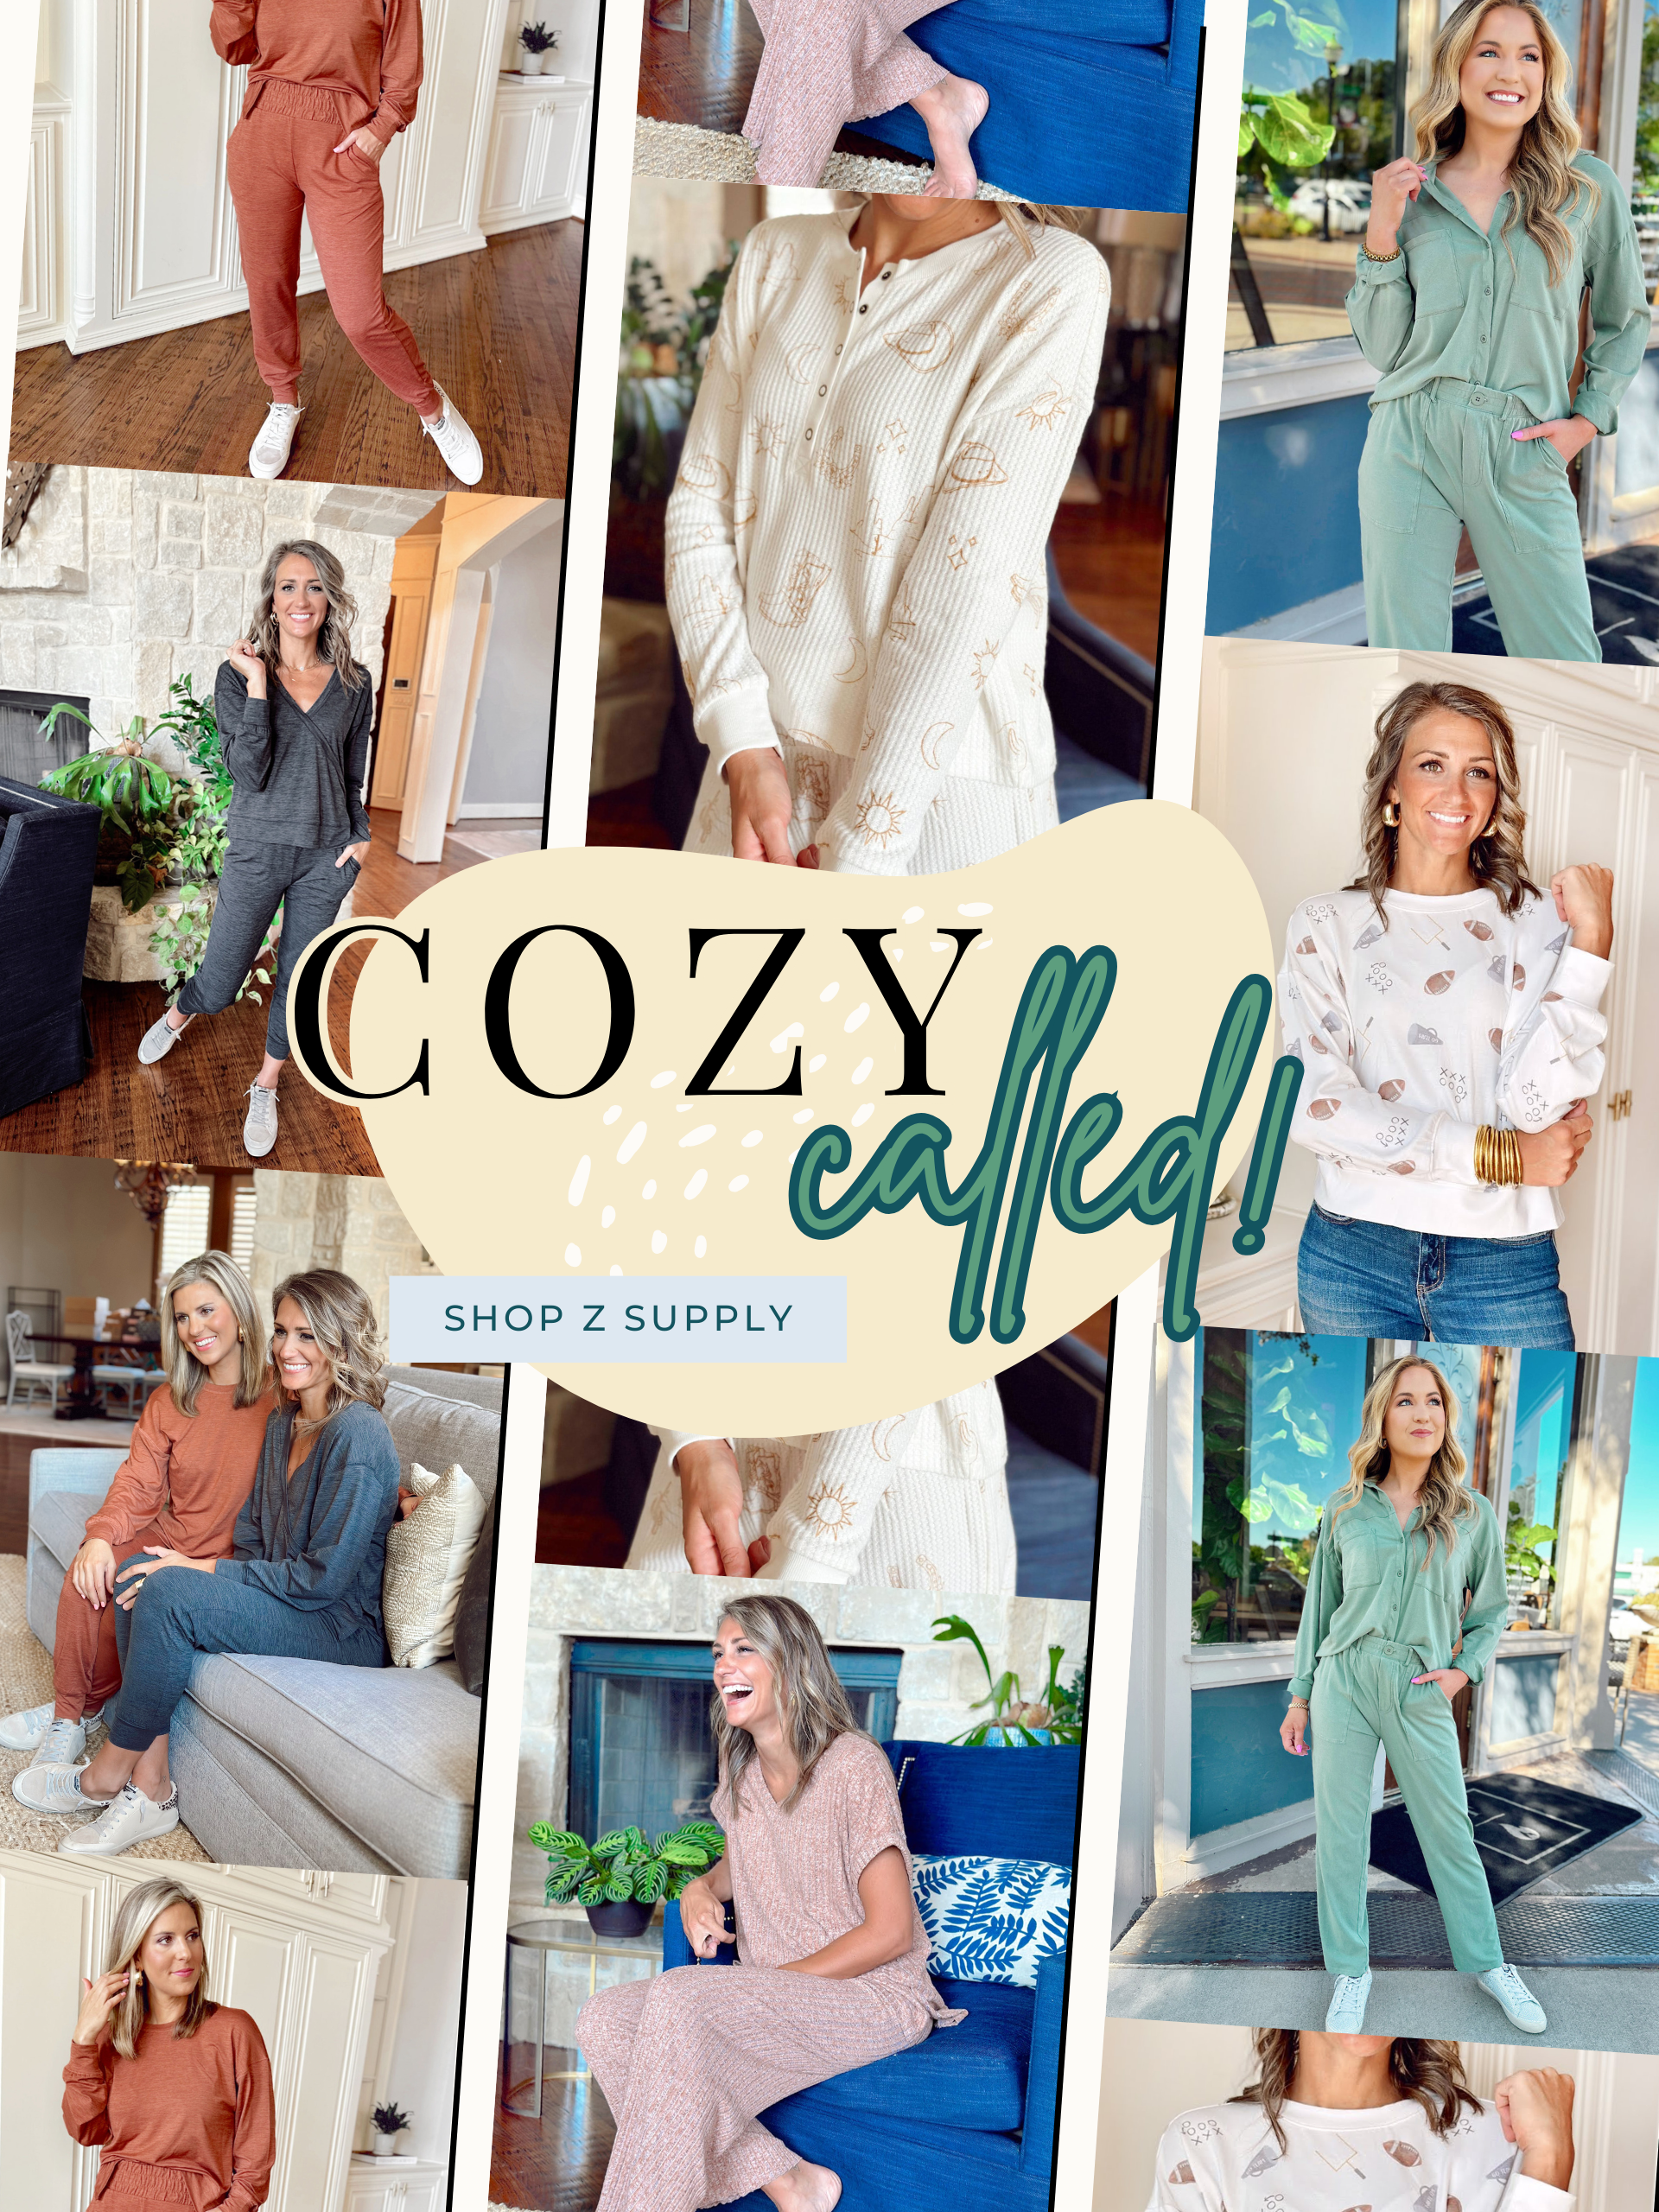 Cozy called! Shop our Z SUPPLY Collection: Models wearing numerous styles by Z SUPPLY including lounge sets, activewear sets and every day styles.